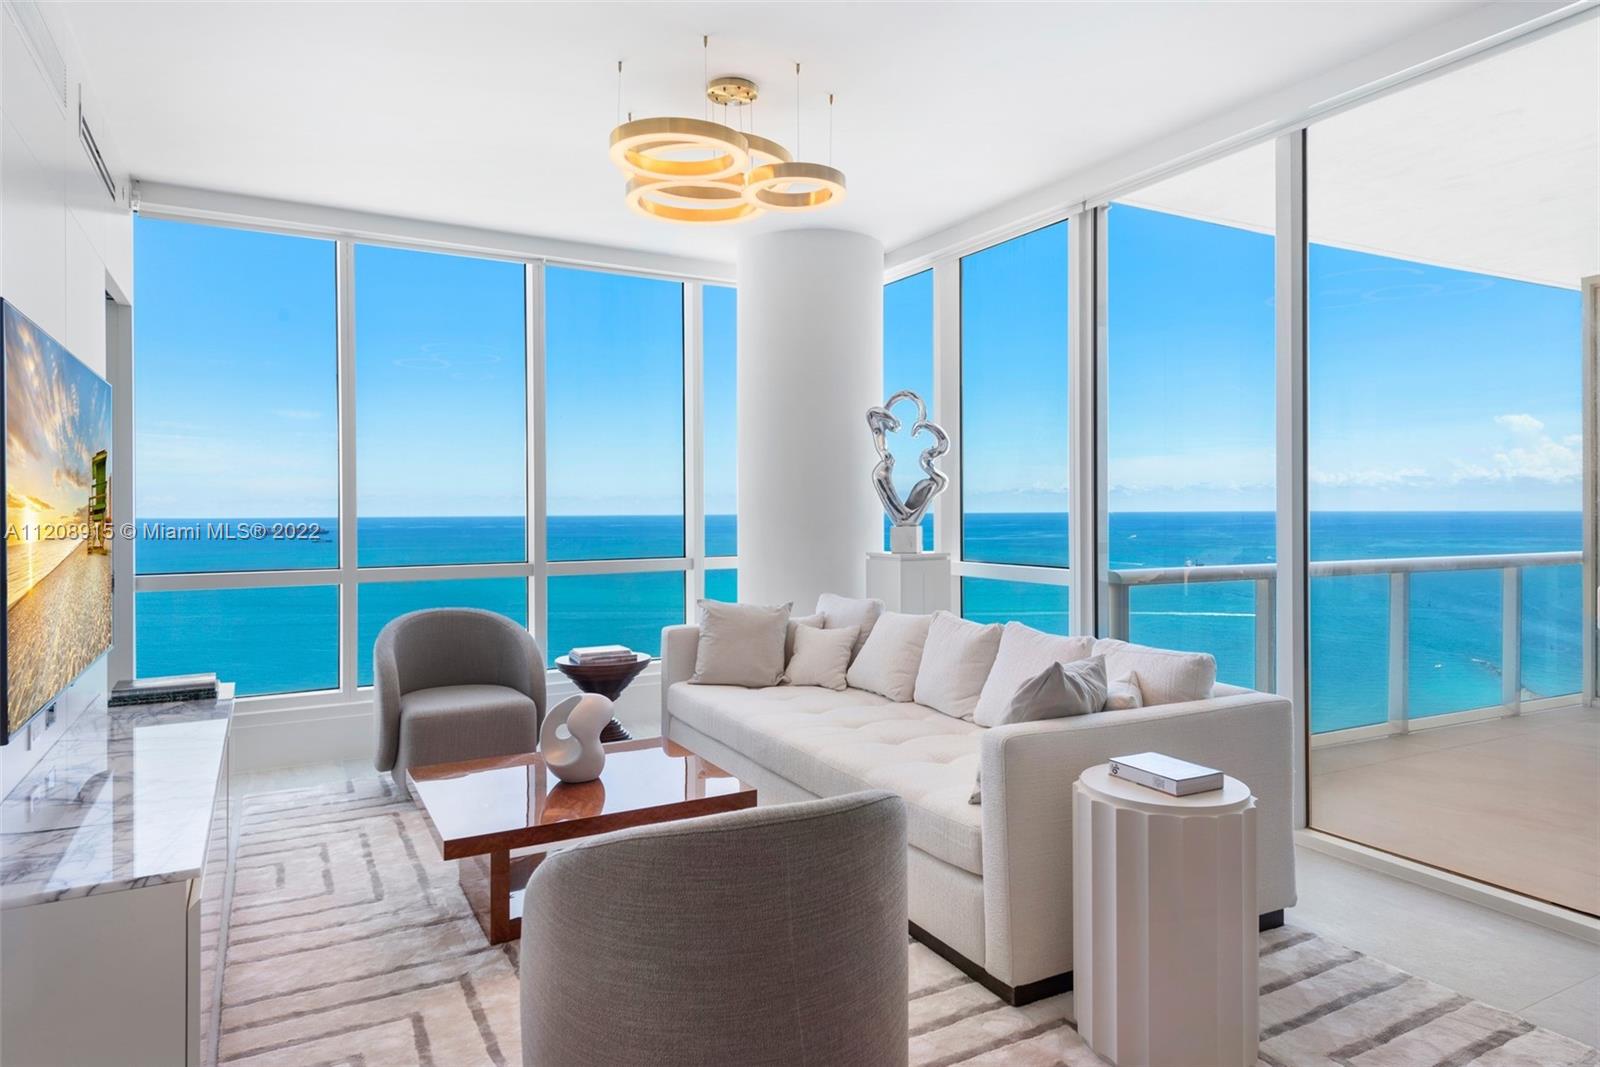 Welcome to the chic lower PH 3905 at Continuum South with unobstructed views of the Atlantic Ocean and the entire Miami Beach coastline as far as the eye can see. The Italian designed turnkey furnished sanctuary was re-imagined with the finest finishes blending the beautiful nature outdoors with the interior elements epitomizing blissful living. The newly constructed home in the sky features 10 ft high ceilings, architectural lighting systems and windows treatments on Lutron, Mia Cucina kitchen with Sub-Zero & Miele appliances, custom millwork, WI closets and entertainer’s living room with private terrace. Unparalleled amenities on a 13 acre, private beachfront oasis includes a 3-level gym, spa & salon, 2 lagoon+fitness pools, beach club, tennis club, restaurant, concierge and security.